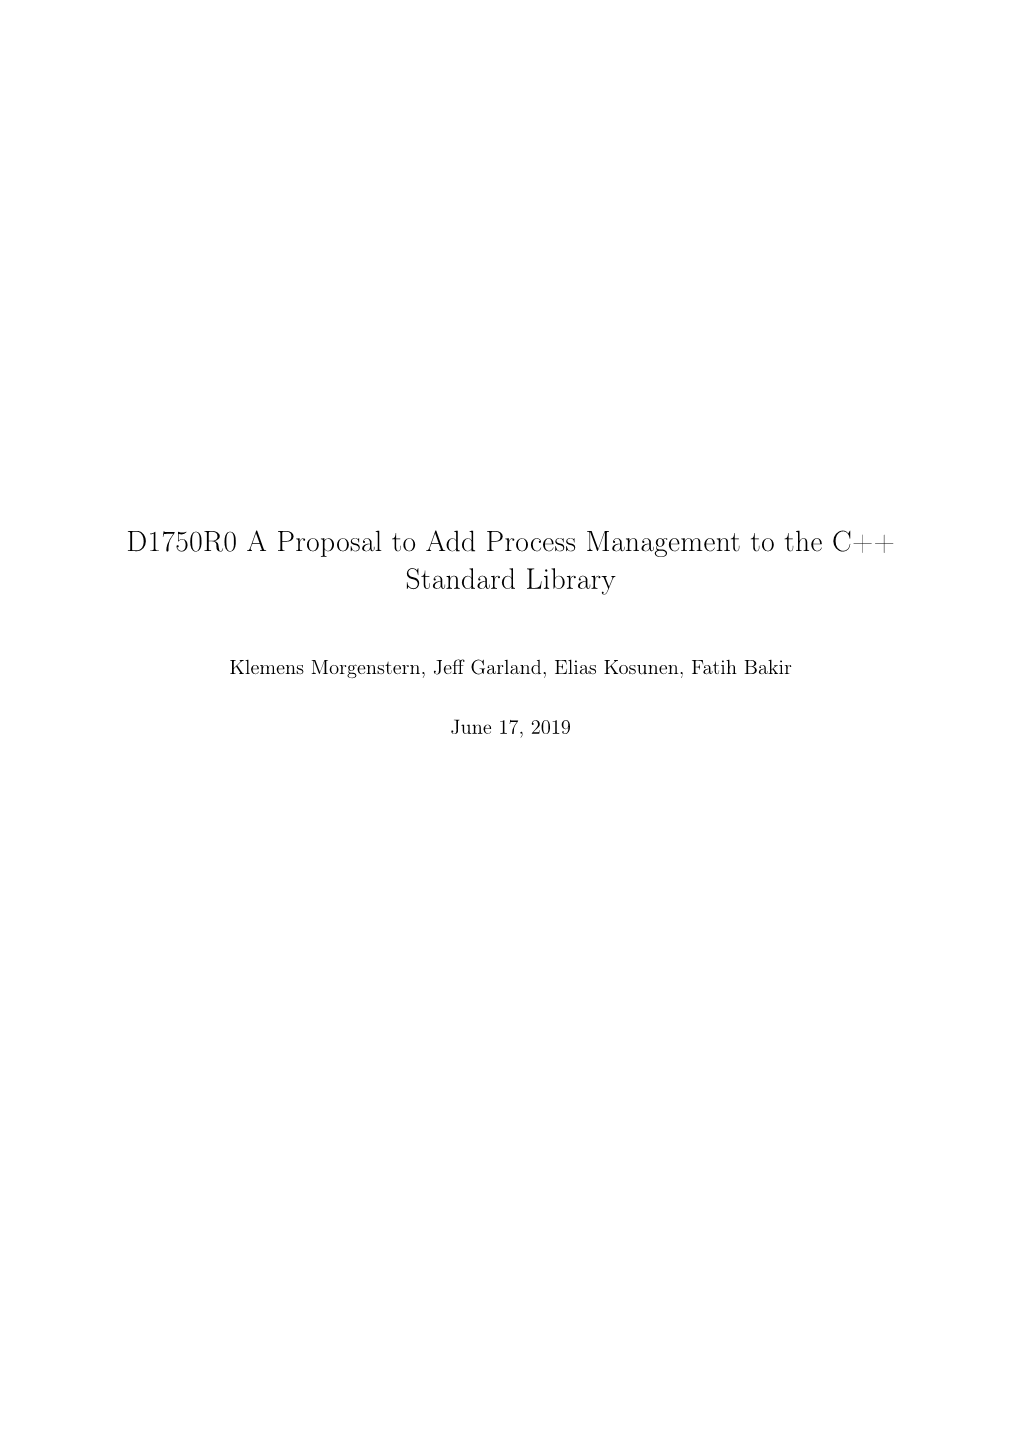 D1750R0 a Proposal to Add Process Management to the C++ Standard Library